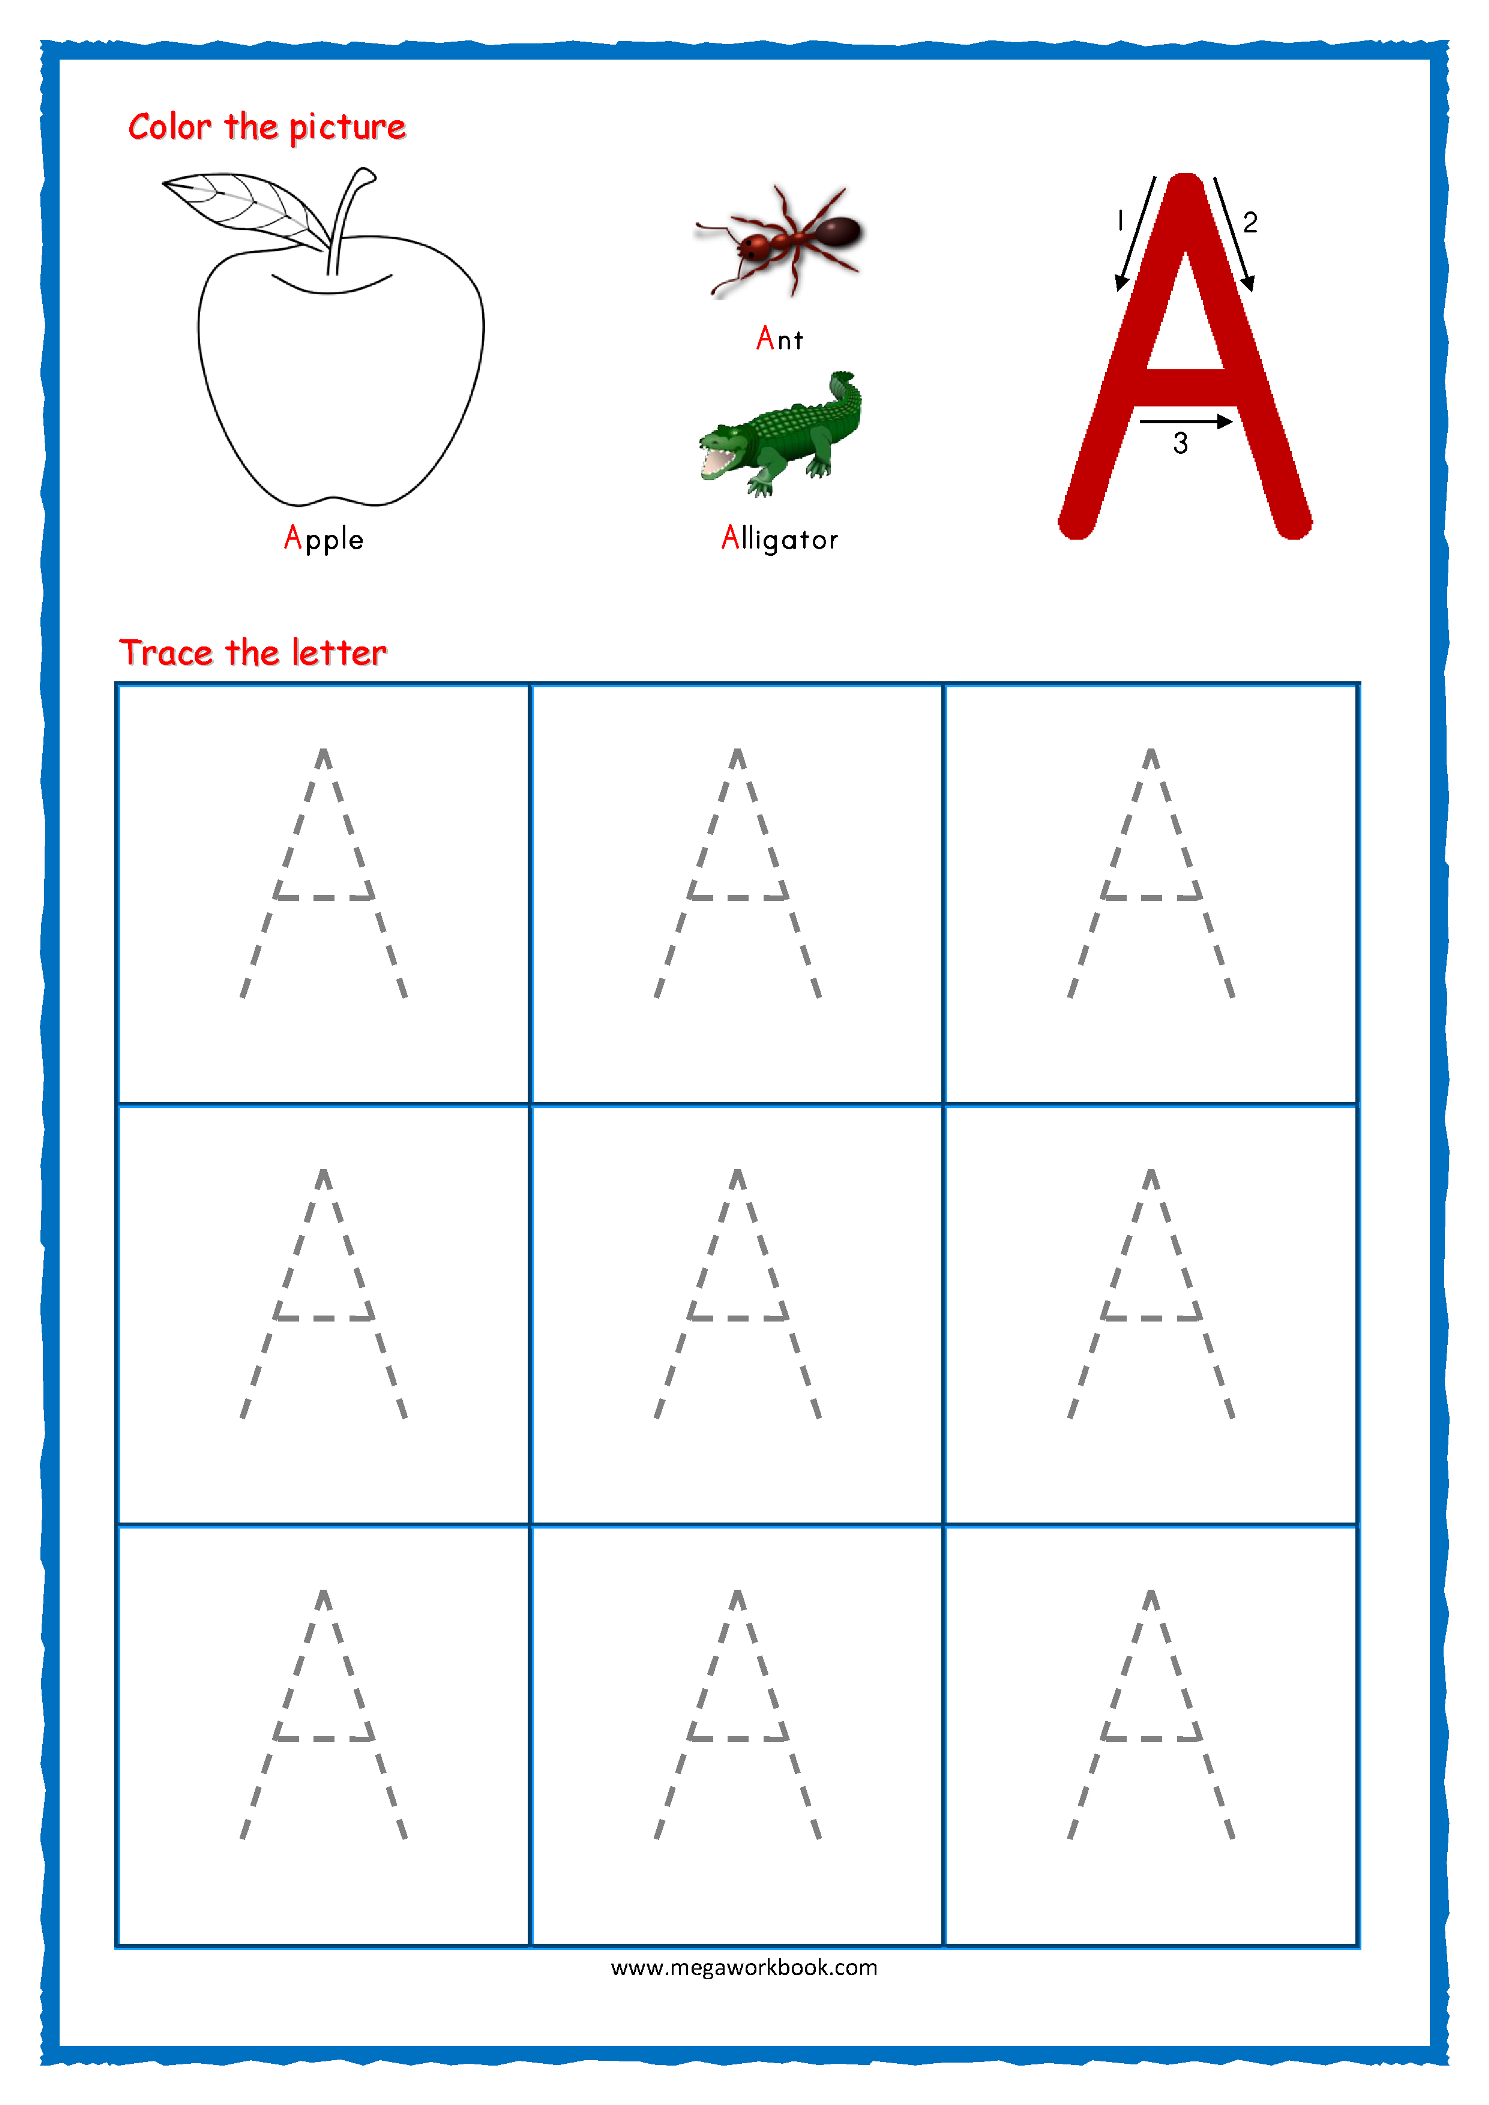 Coloring Book : Tracing Letters Alphabet Capitale Preschool pertaining to Tracing Letters Printables Free